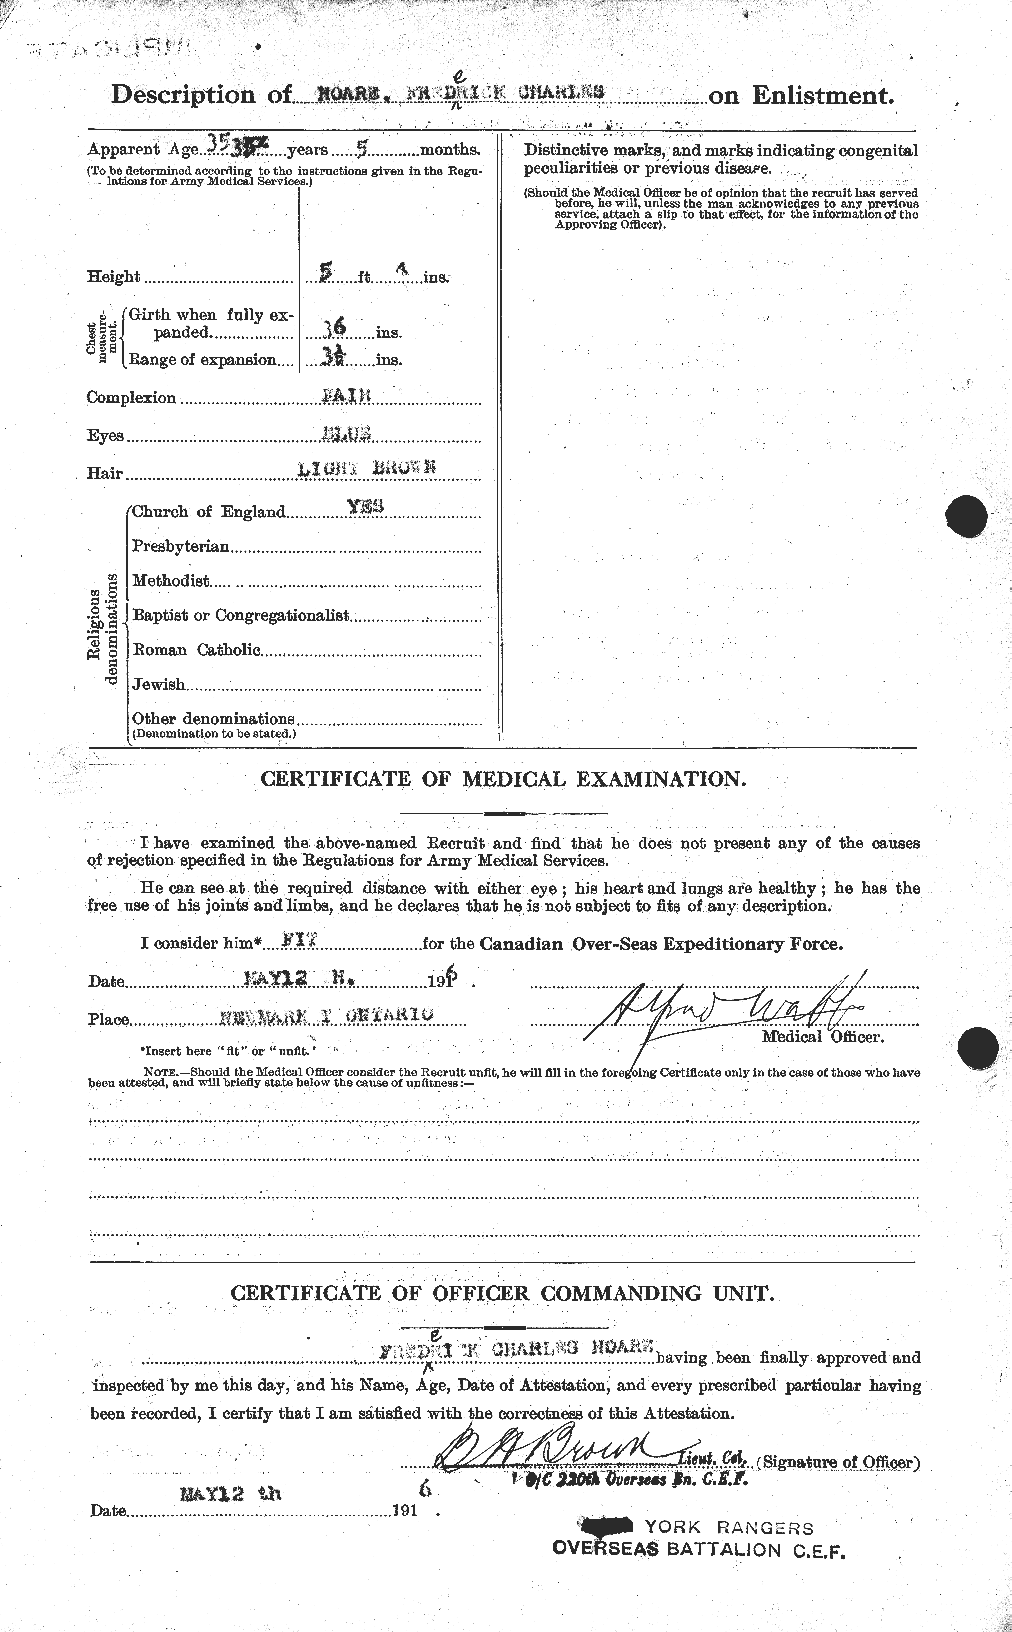 Personnel Records of the First World War - CEF 394828b